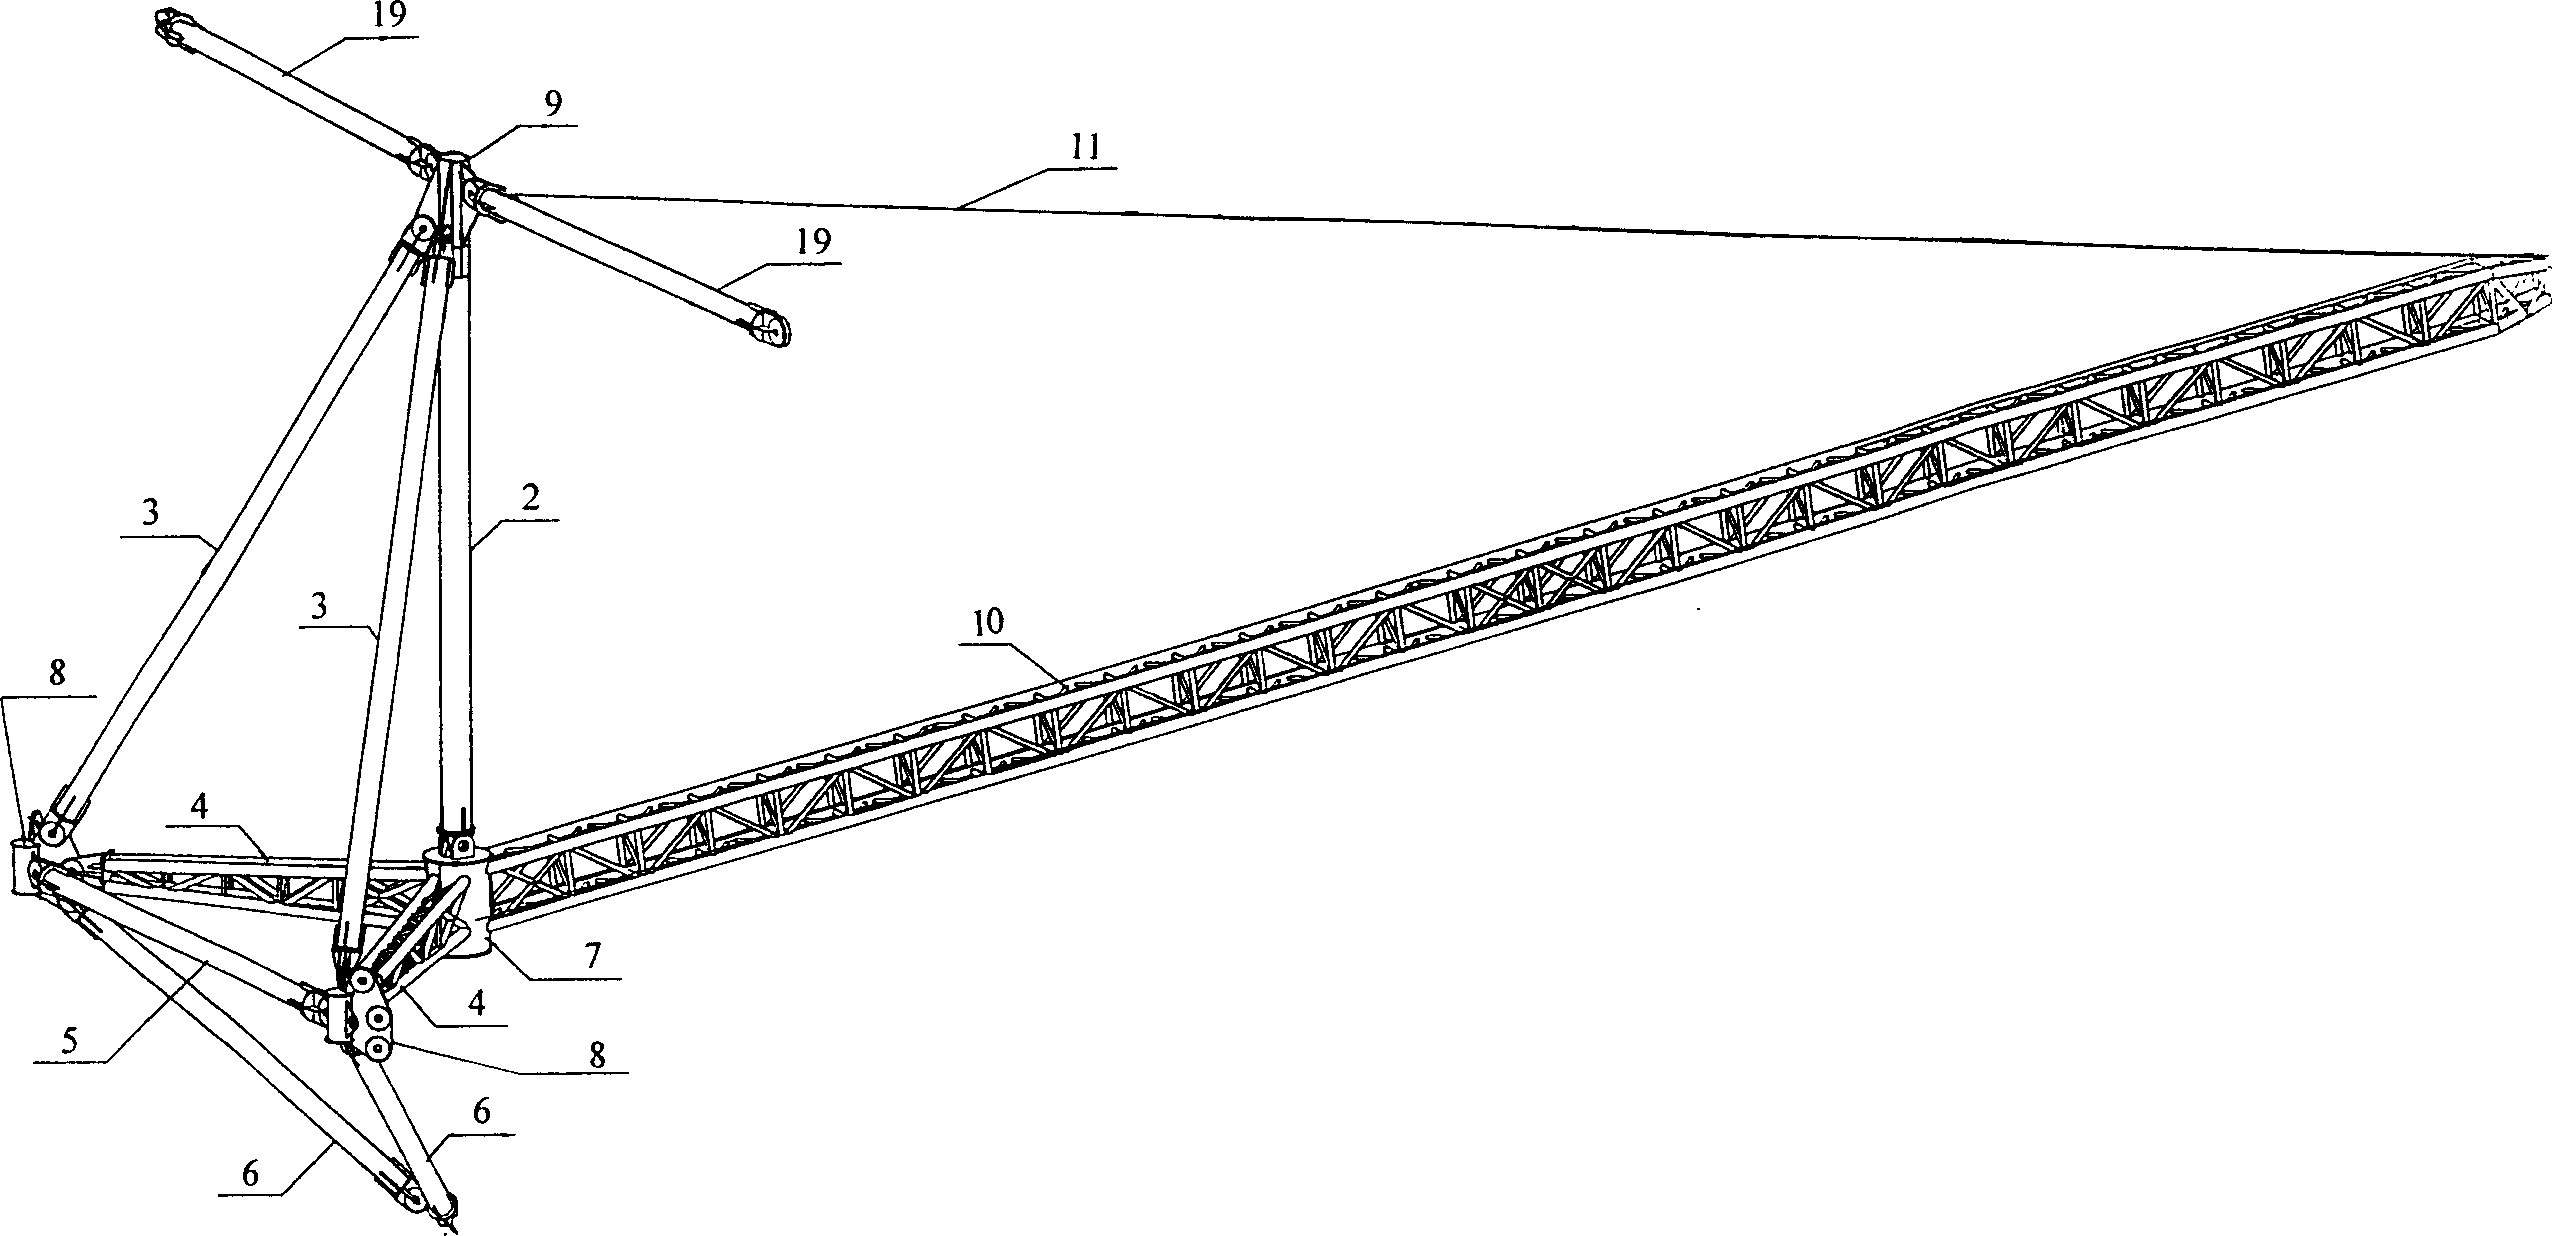 Construction method for large overhead cable-steel structure system